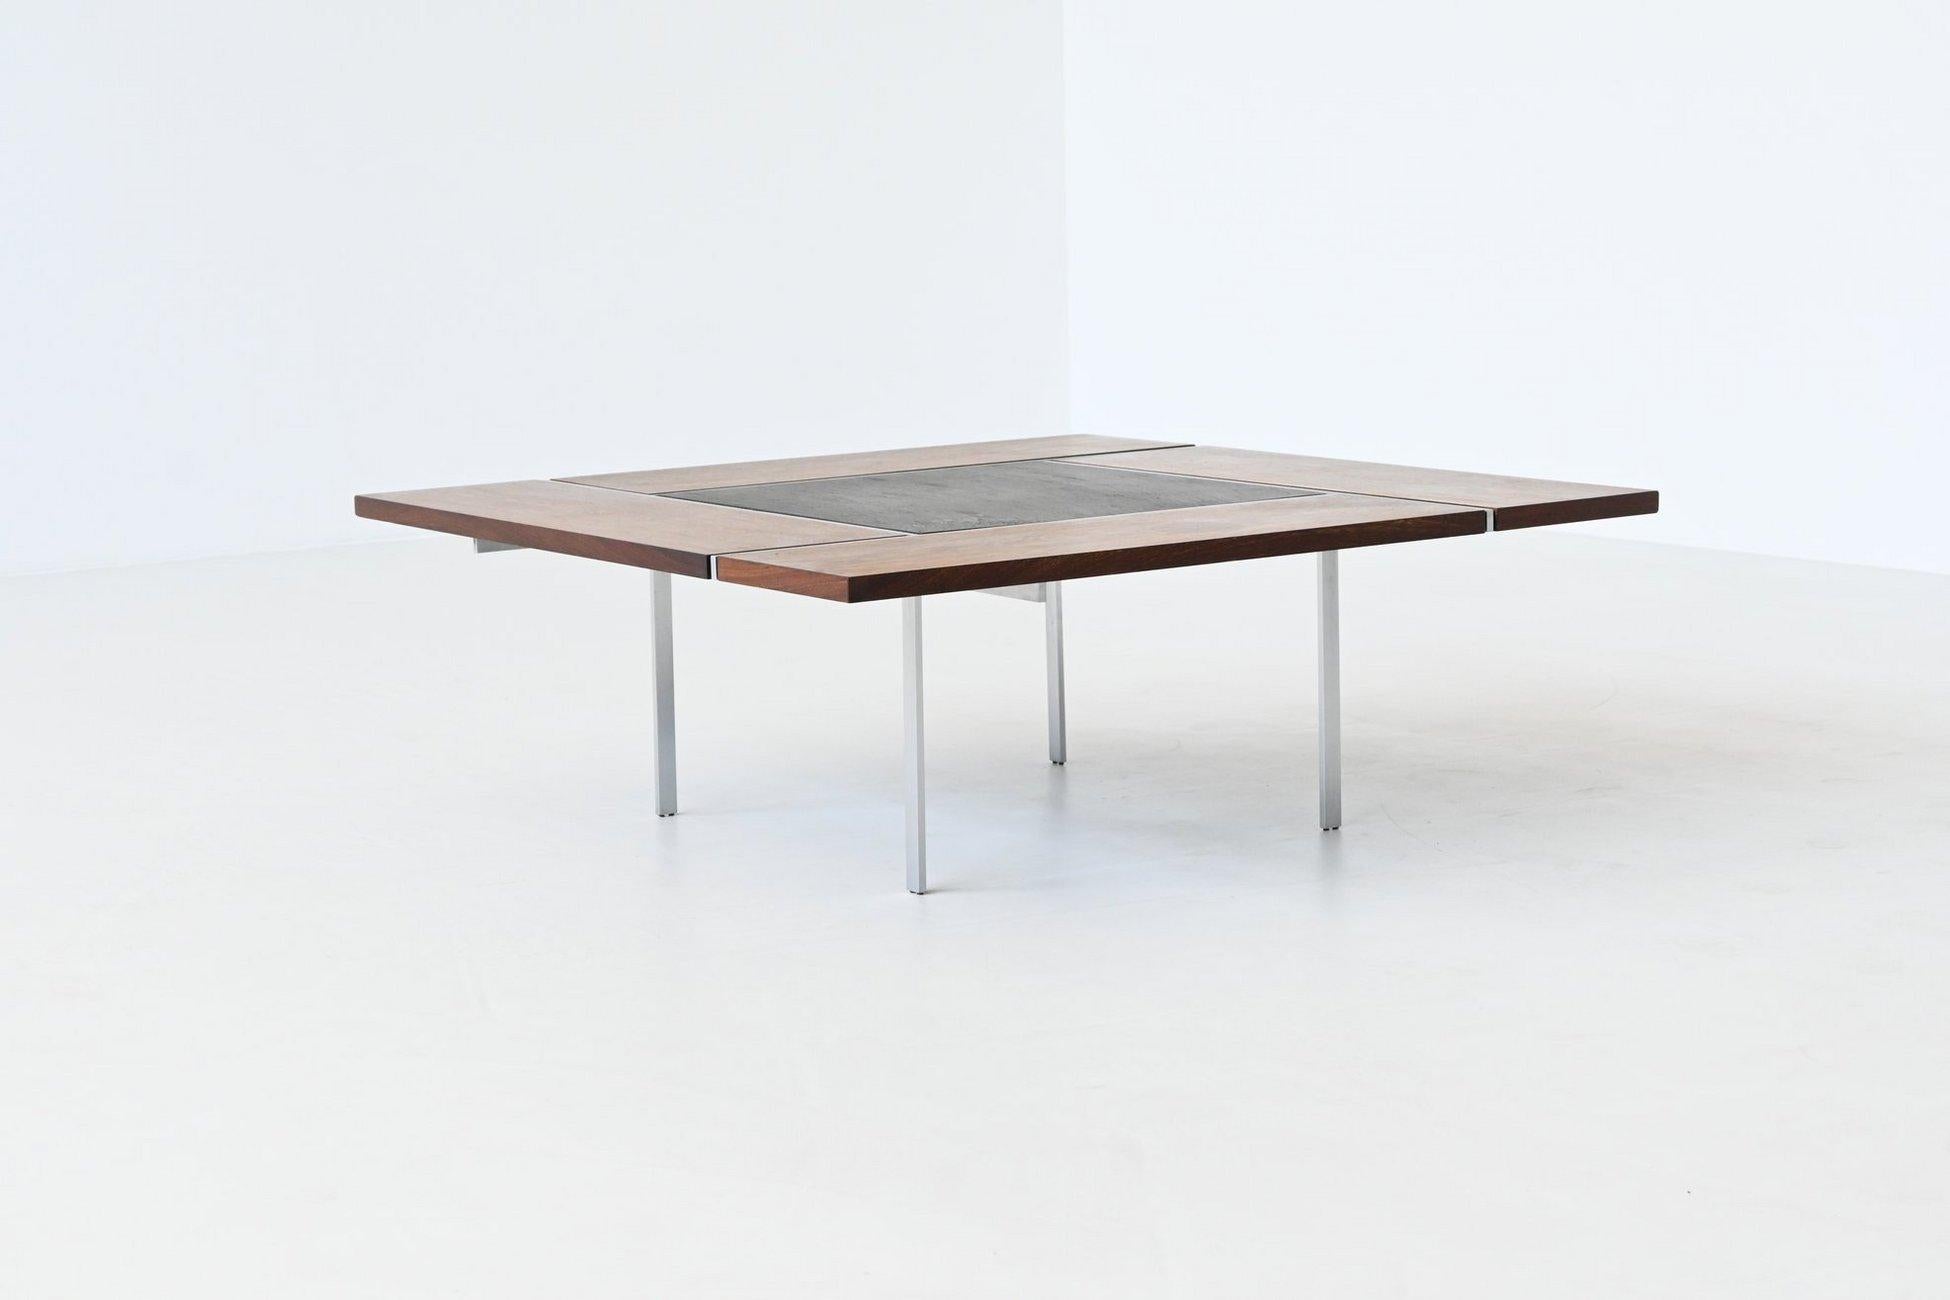 Gorgeous model BO 750 coffee table designed by Preben Fabricius for Bo-Ex, Denmark 1970. The table has a wenge wood top with a black slate tile in the middle, supported by a matte chromed-plated steel frame. The wenge wood has a beautiful colour and